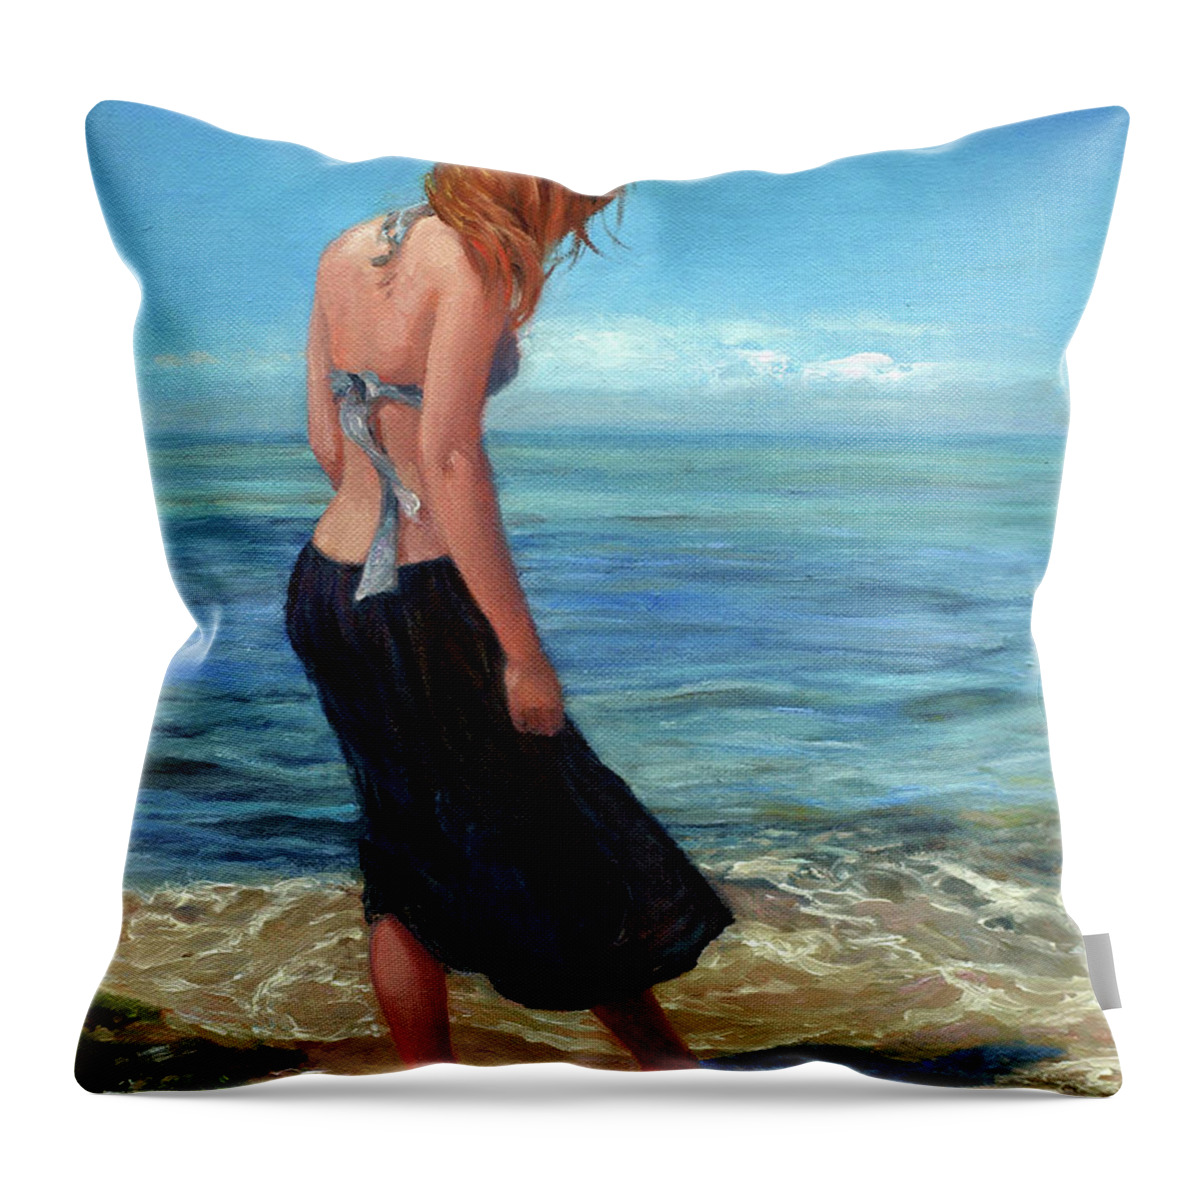 Young Woman In Surf Throw Pillow featuring the painting The Black Skirt by Marie Witte